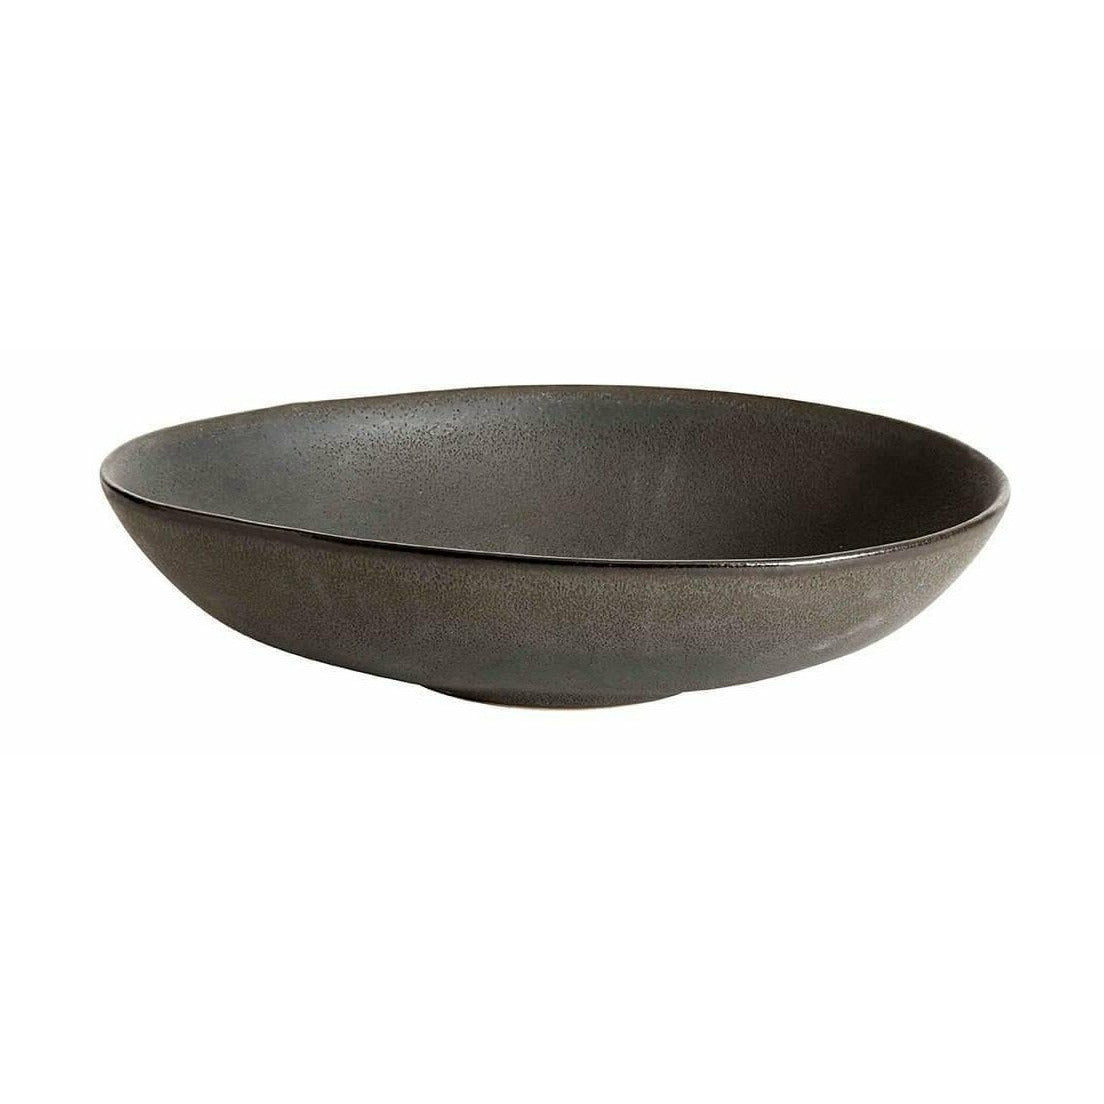 Muubs Mame Serving Bowl Coffee, 19 cm